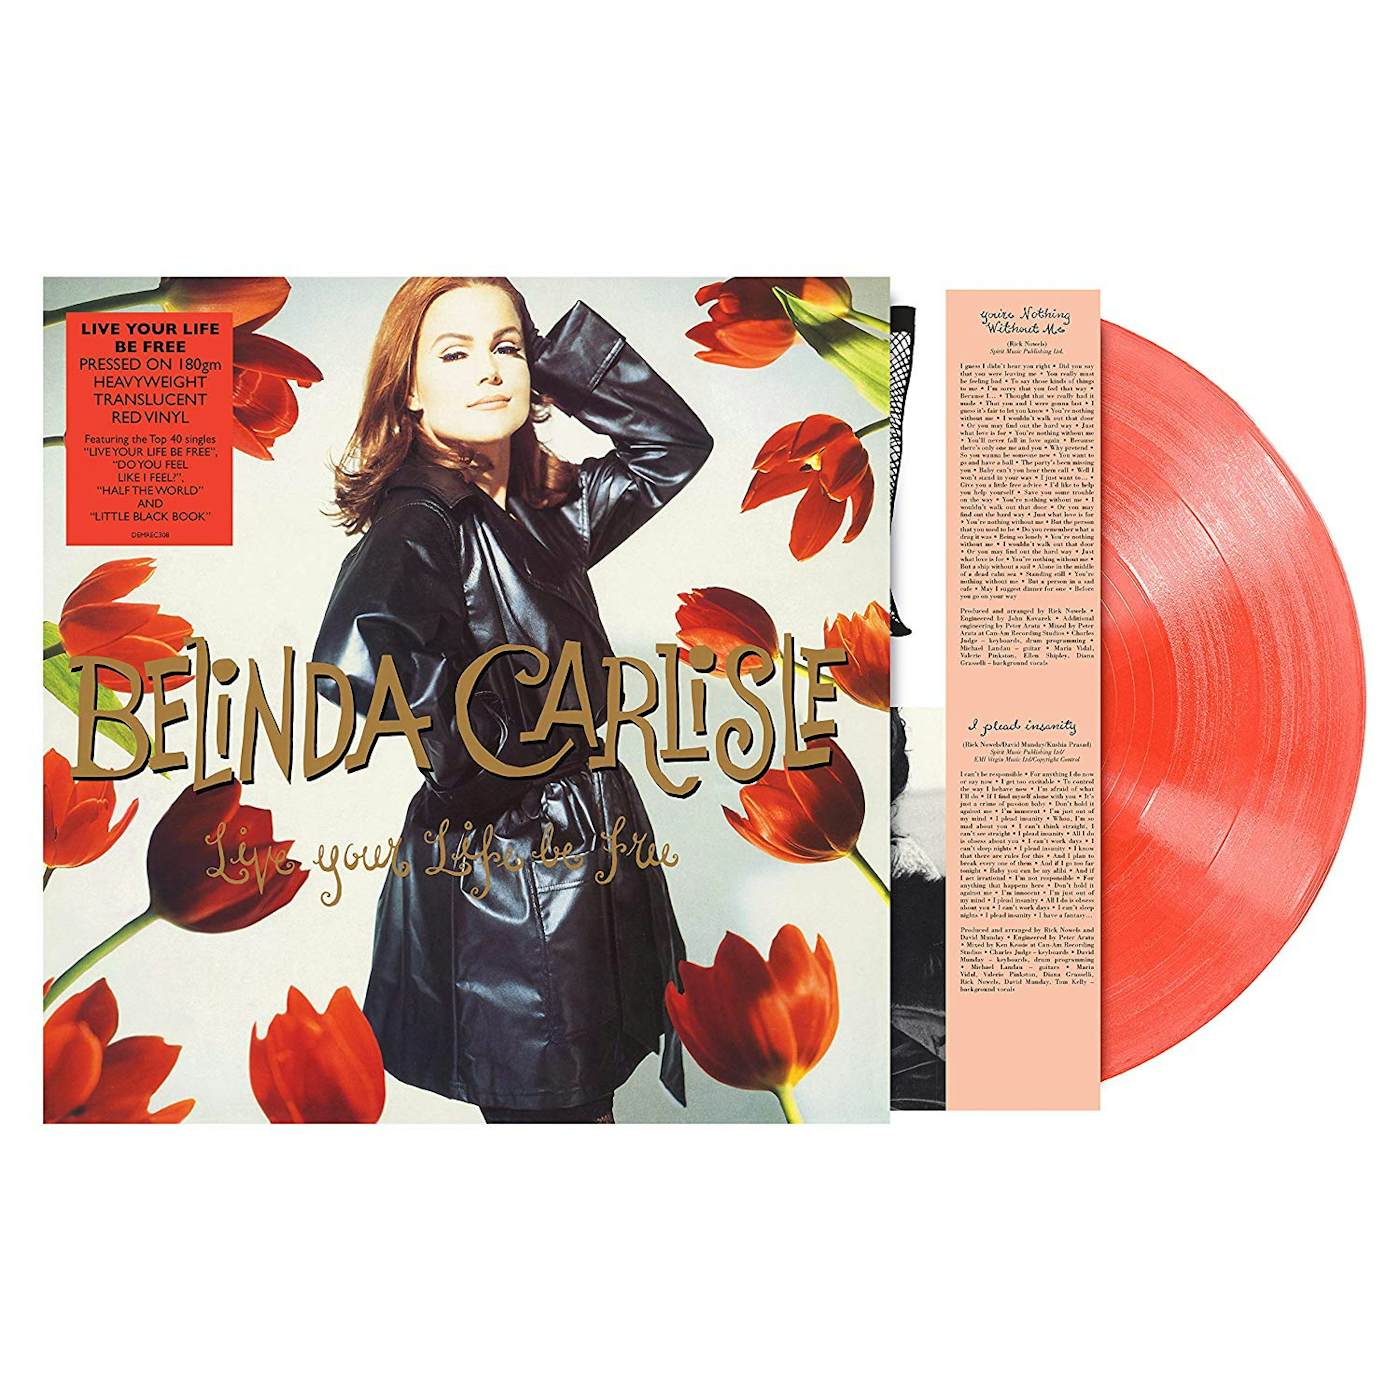 Belinda Carlisle LIVE YOUR LIFE BE FREE - Limited Edition 180 Gram Peach Colored Vinyl Record